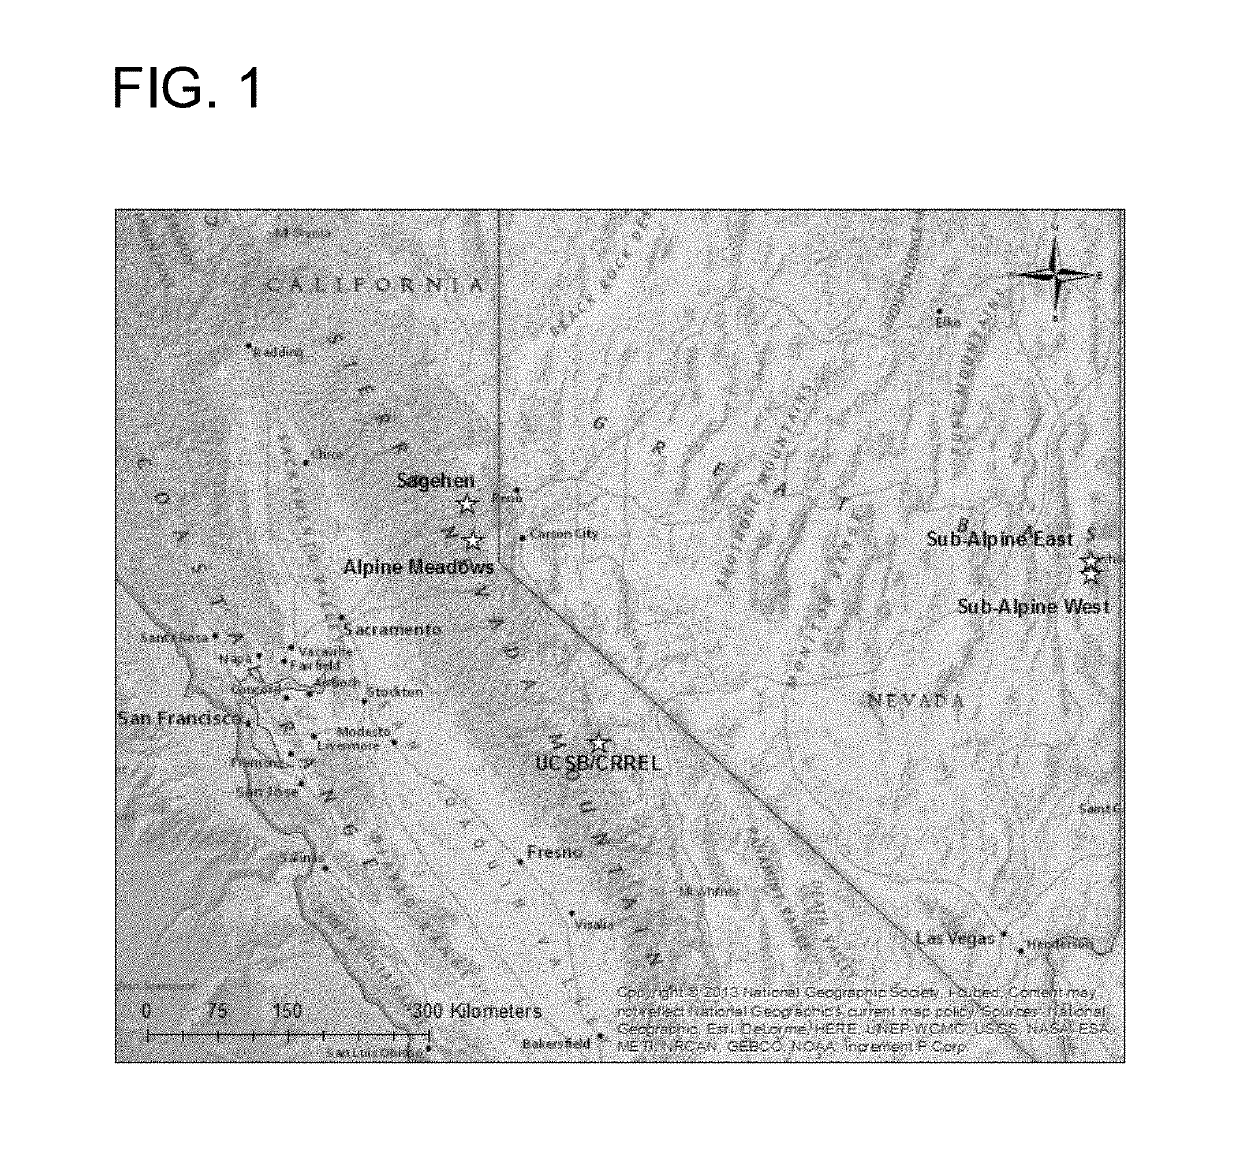 Systems and methods for determining snowpack characteristics